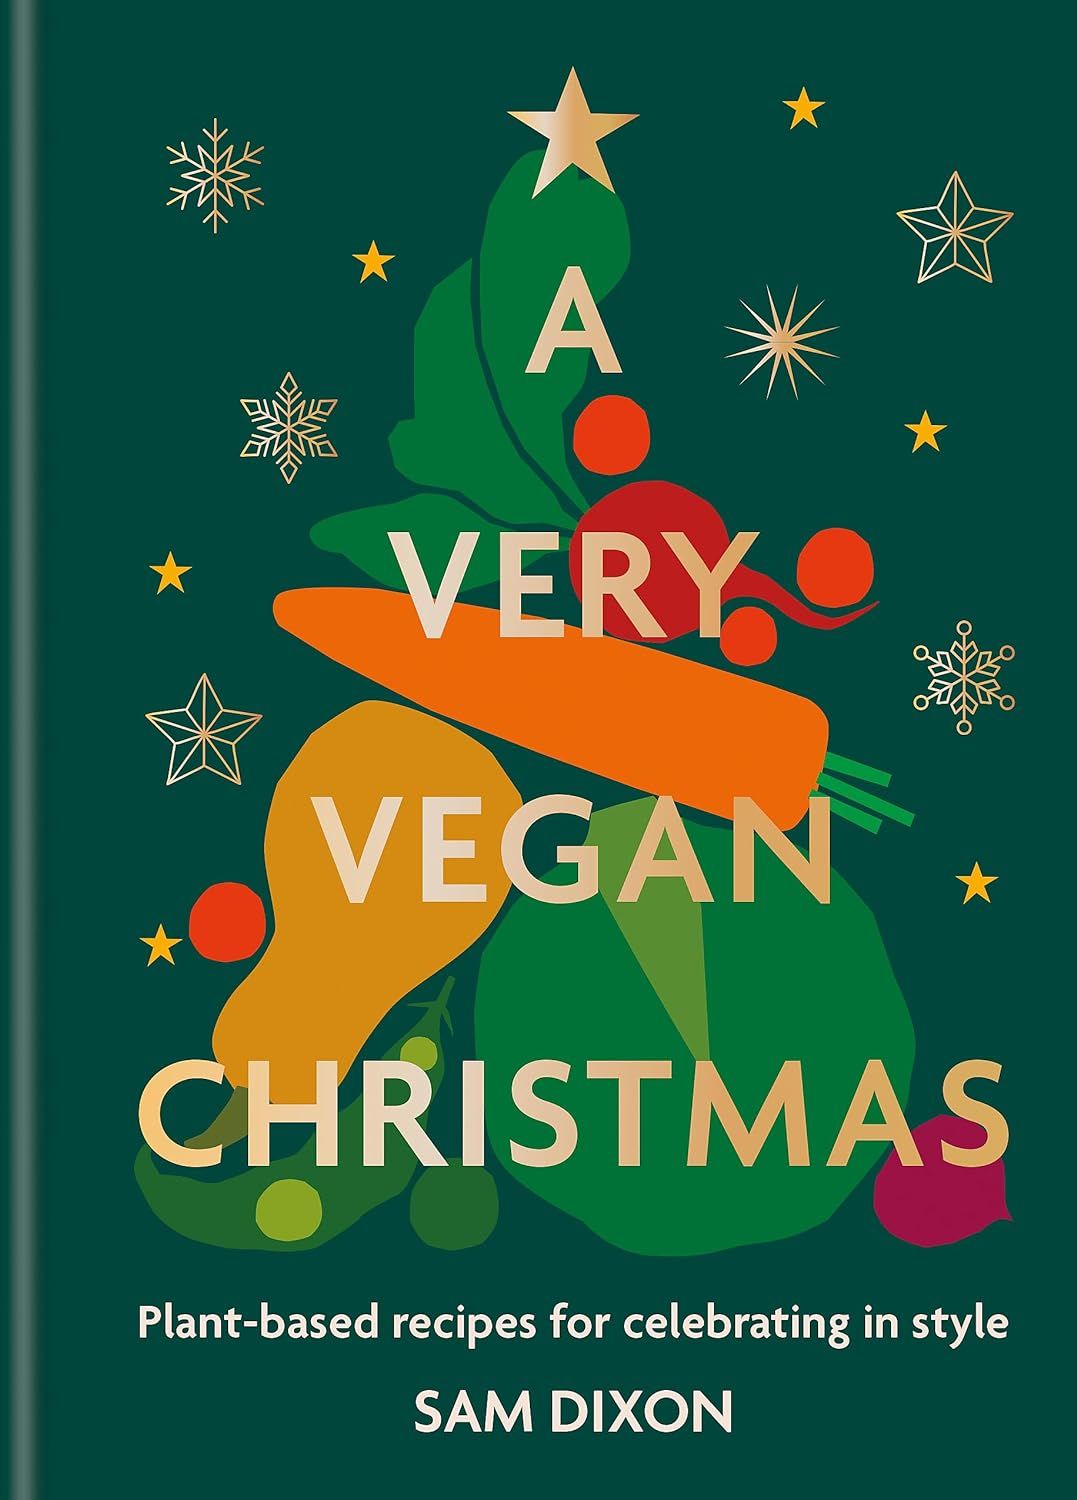  A Very Vegan Christmas: Plant-based recipes for celebrating in style 